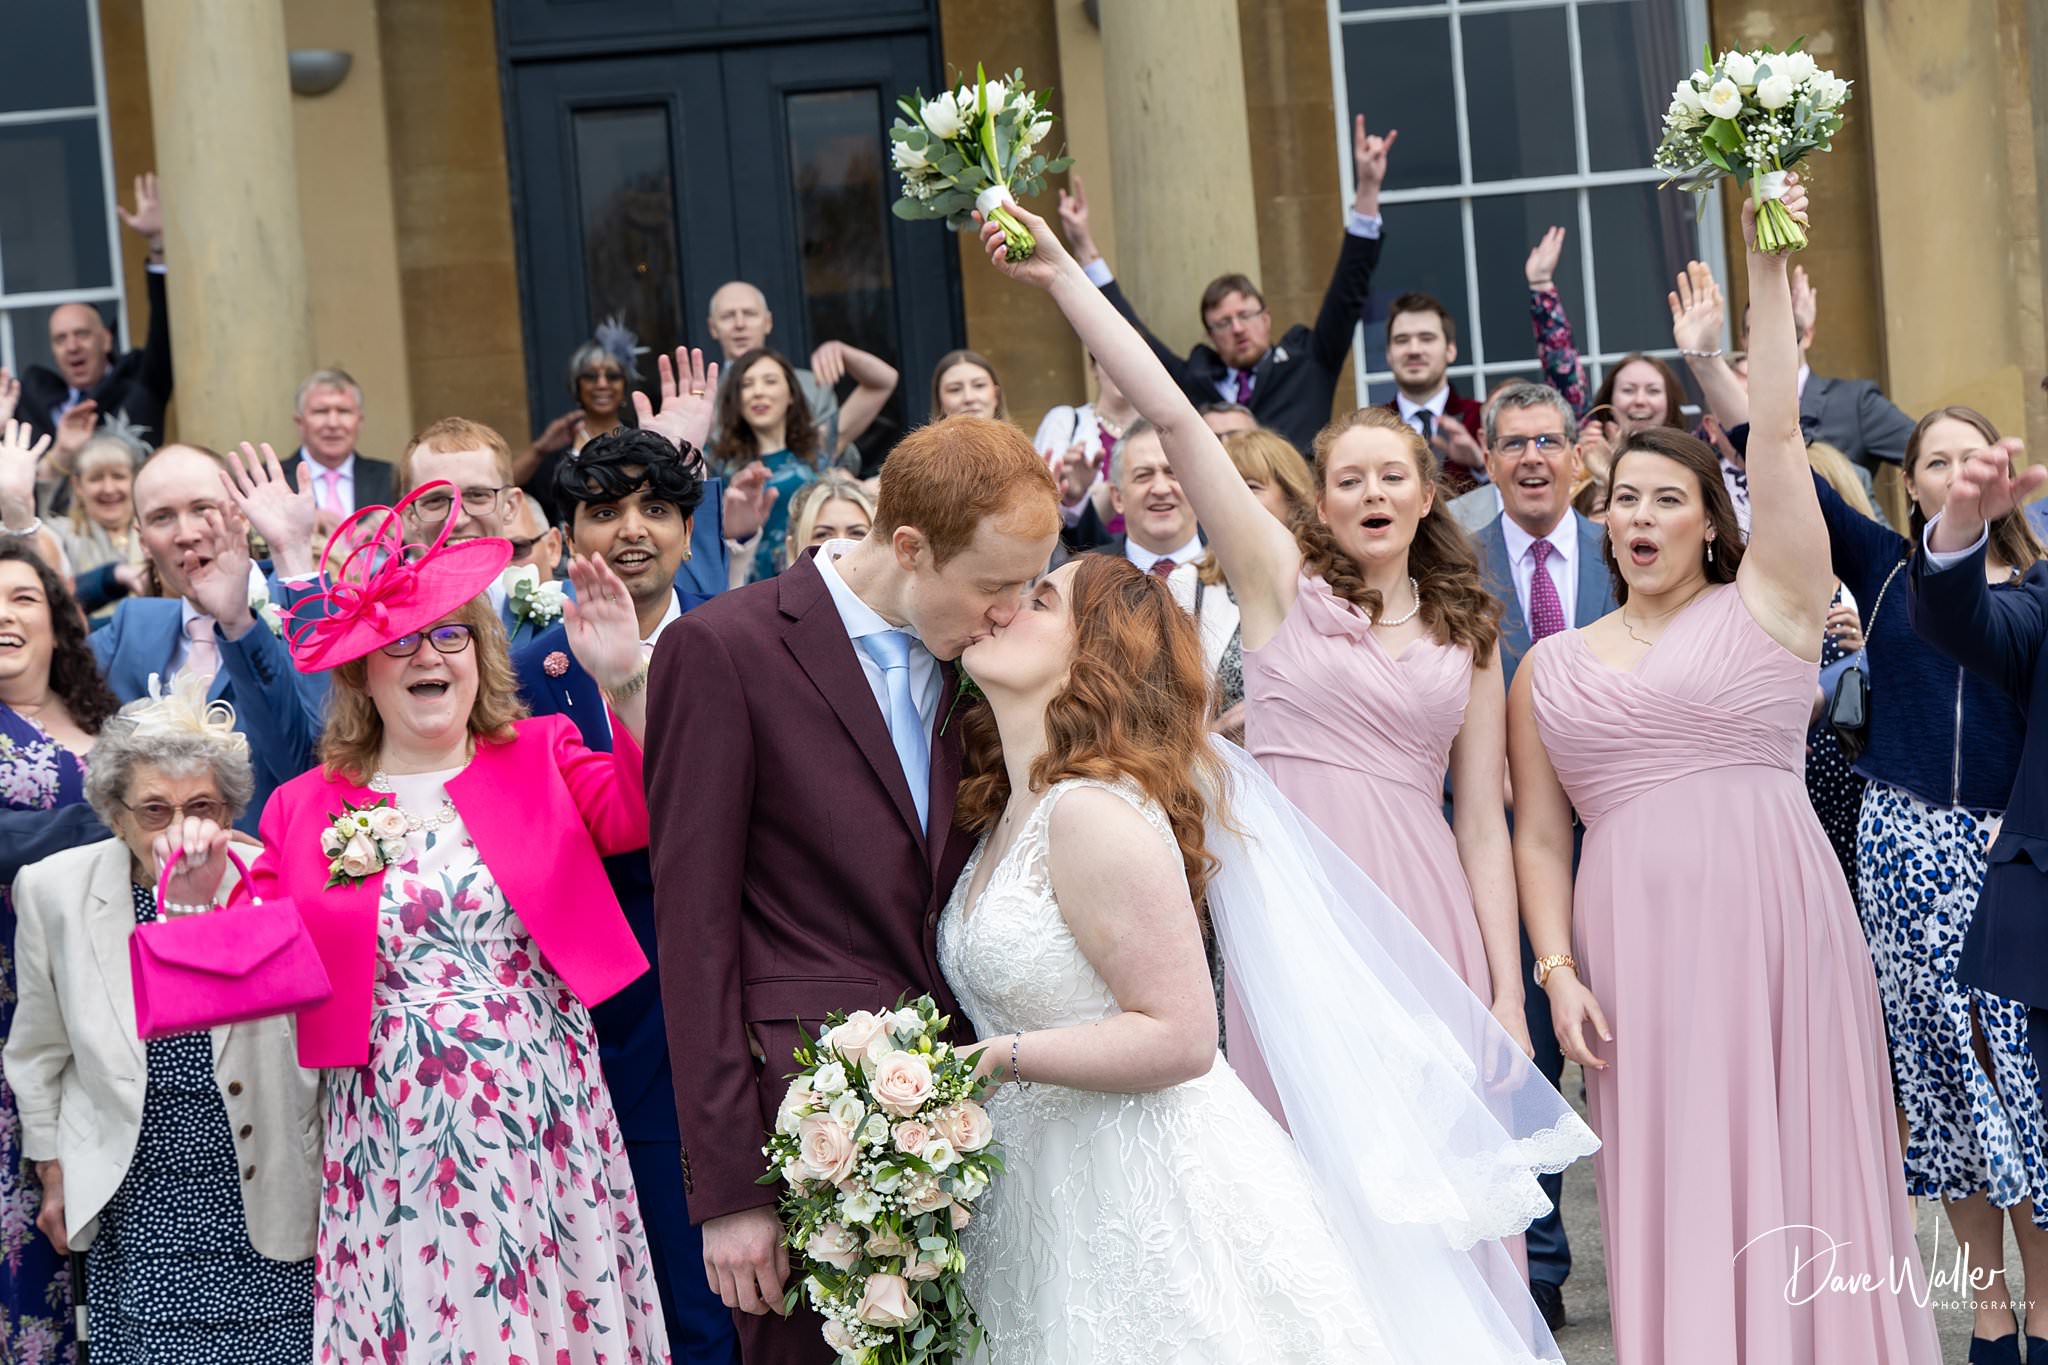 A joyful newlywed couple, Natasha & Marcus, share a kiss as they are surrounded by excited friends and family cheering and celebrating the special moment at their Rudding Park Wedding.